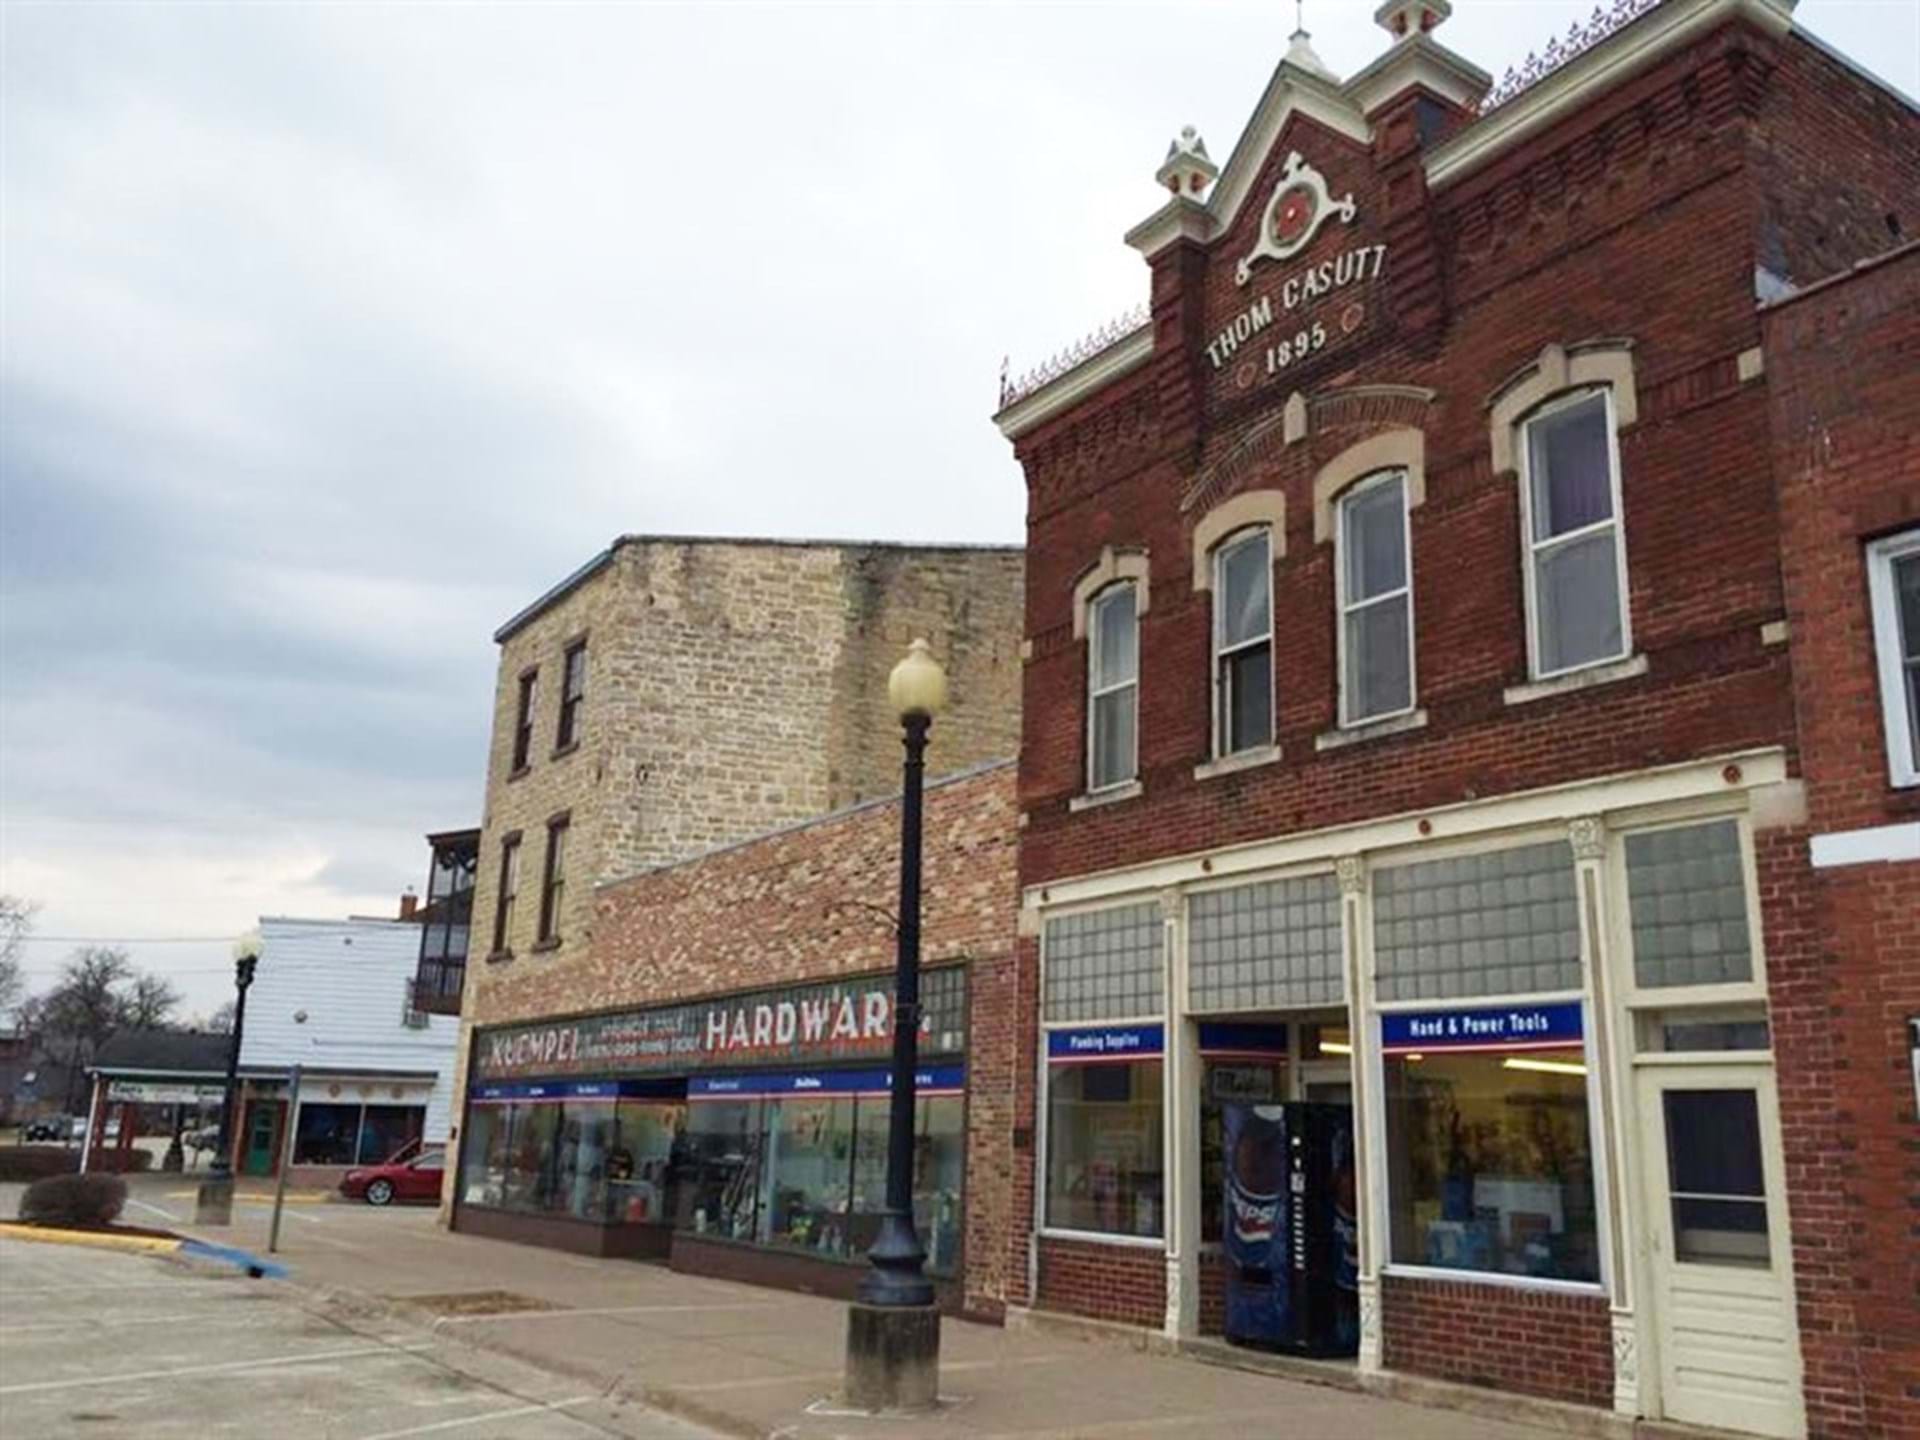 Kuempel Hardware occupies a complex of buildings listed on the National Register of Historic Places